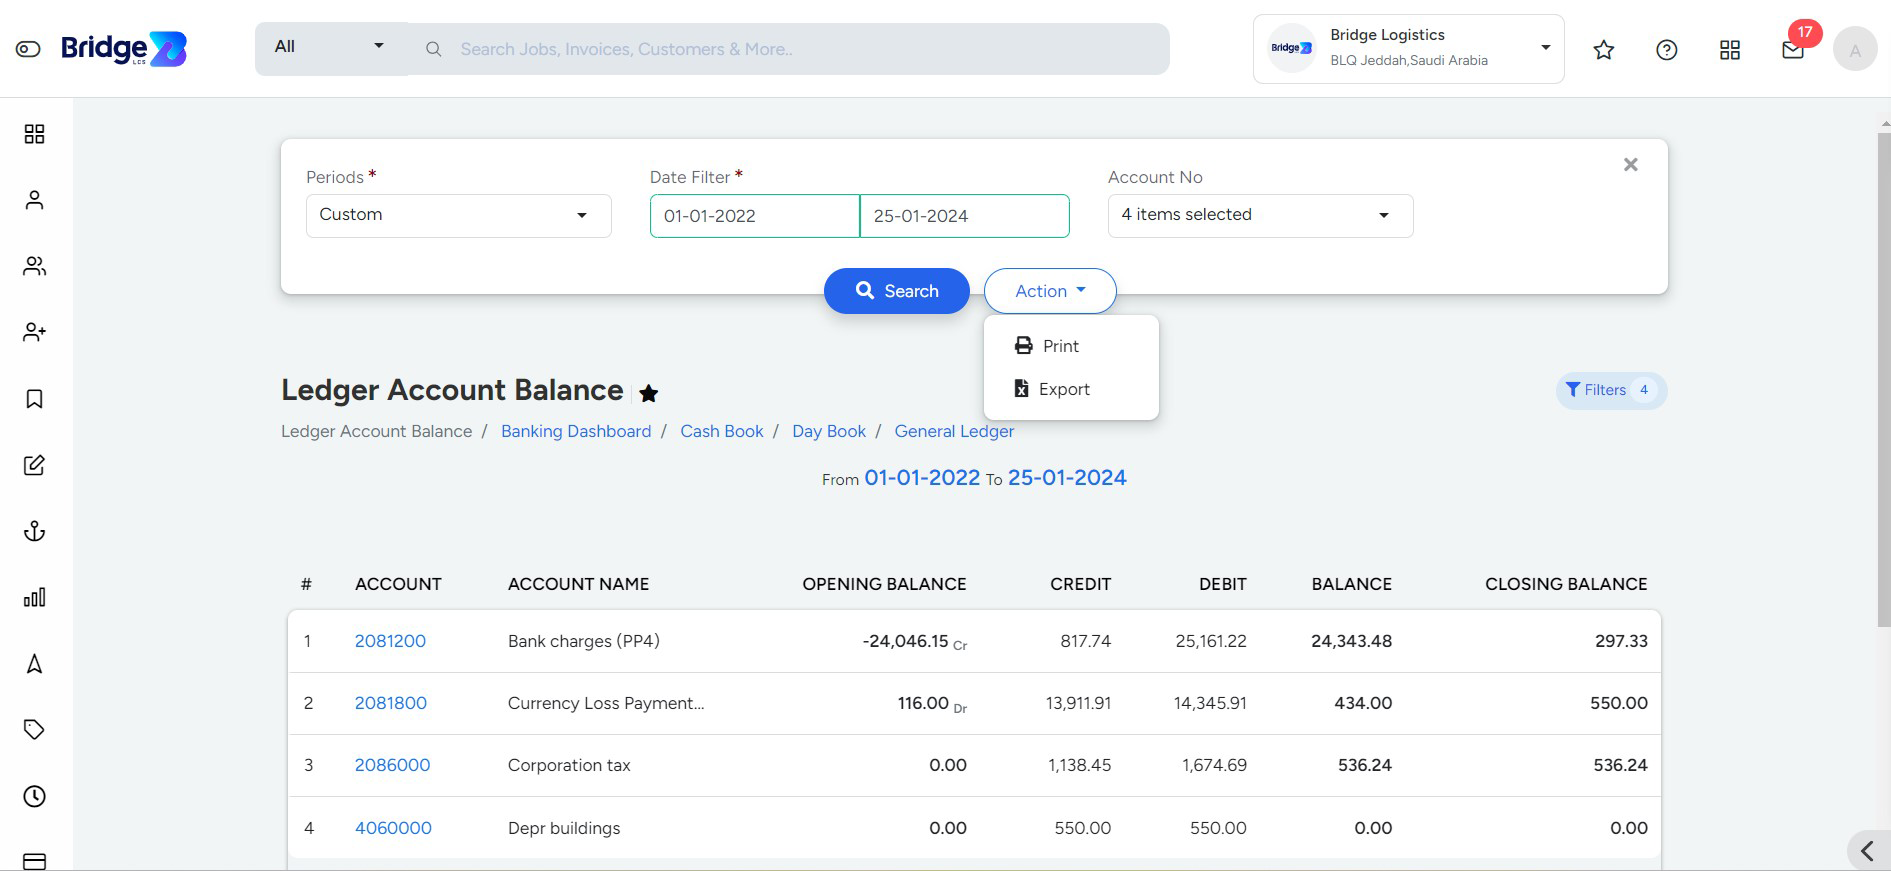 Ledger Account Balance Page In Bridge LCS Cargo Management System Software